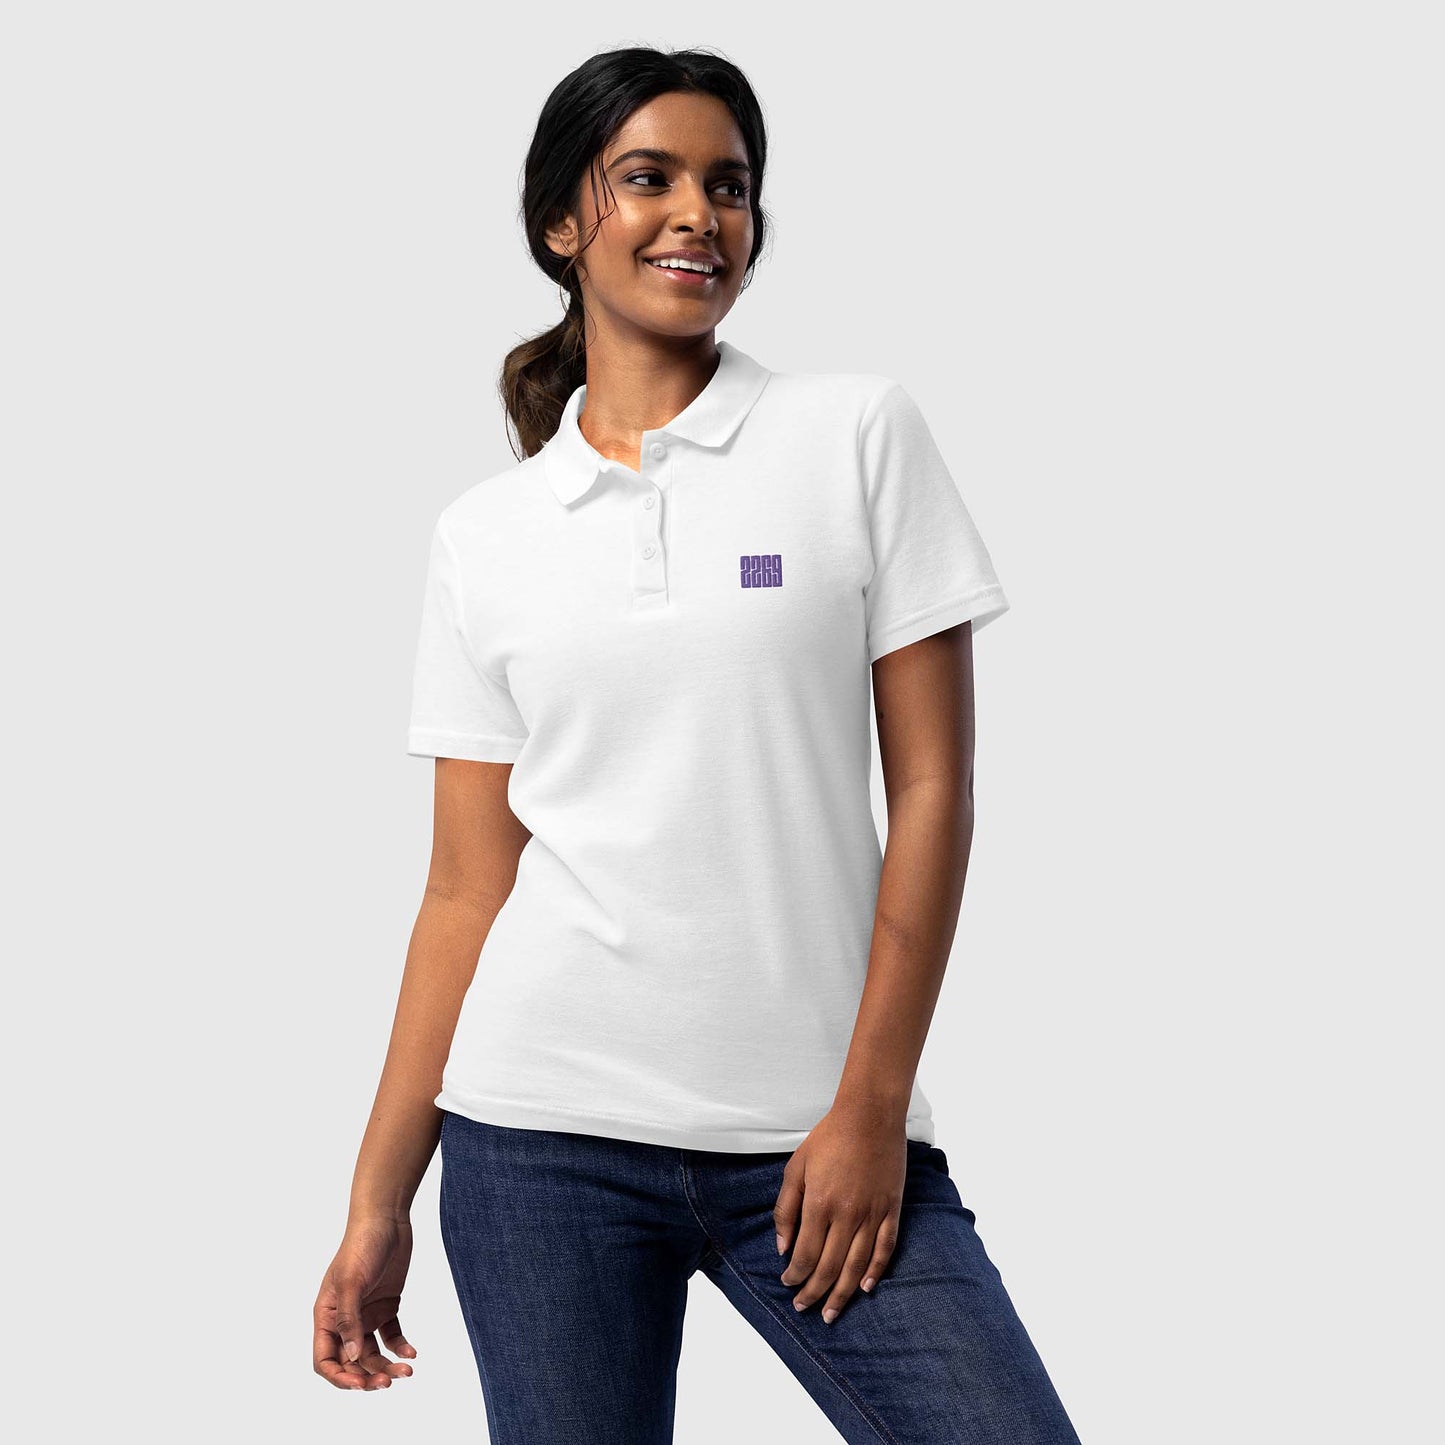 Women’s white pique polo shirt with embroidered 2269 logo